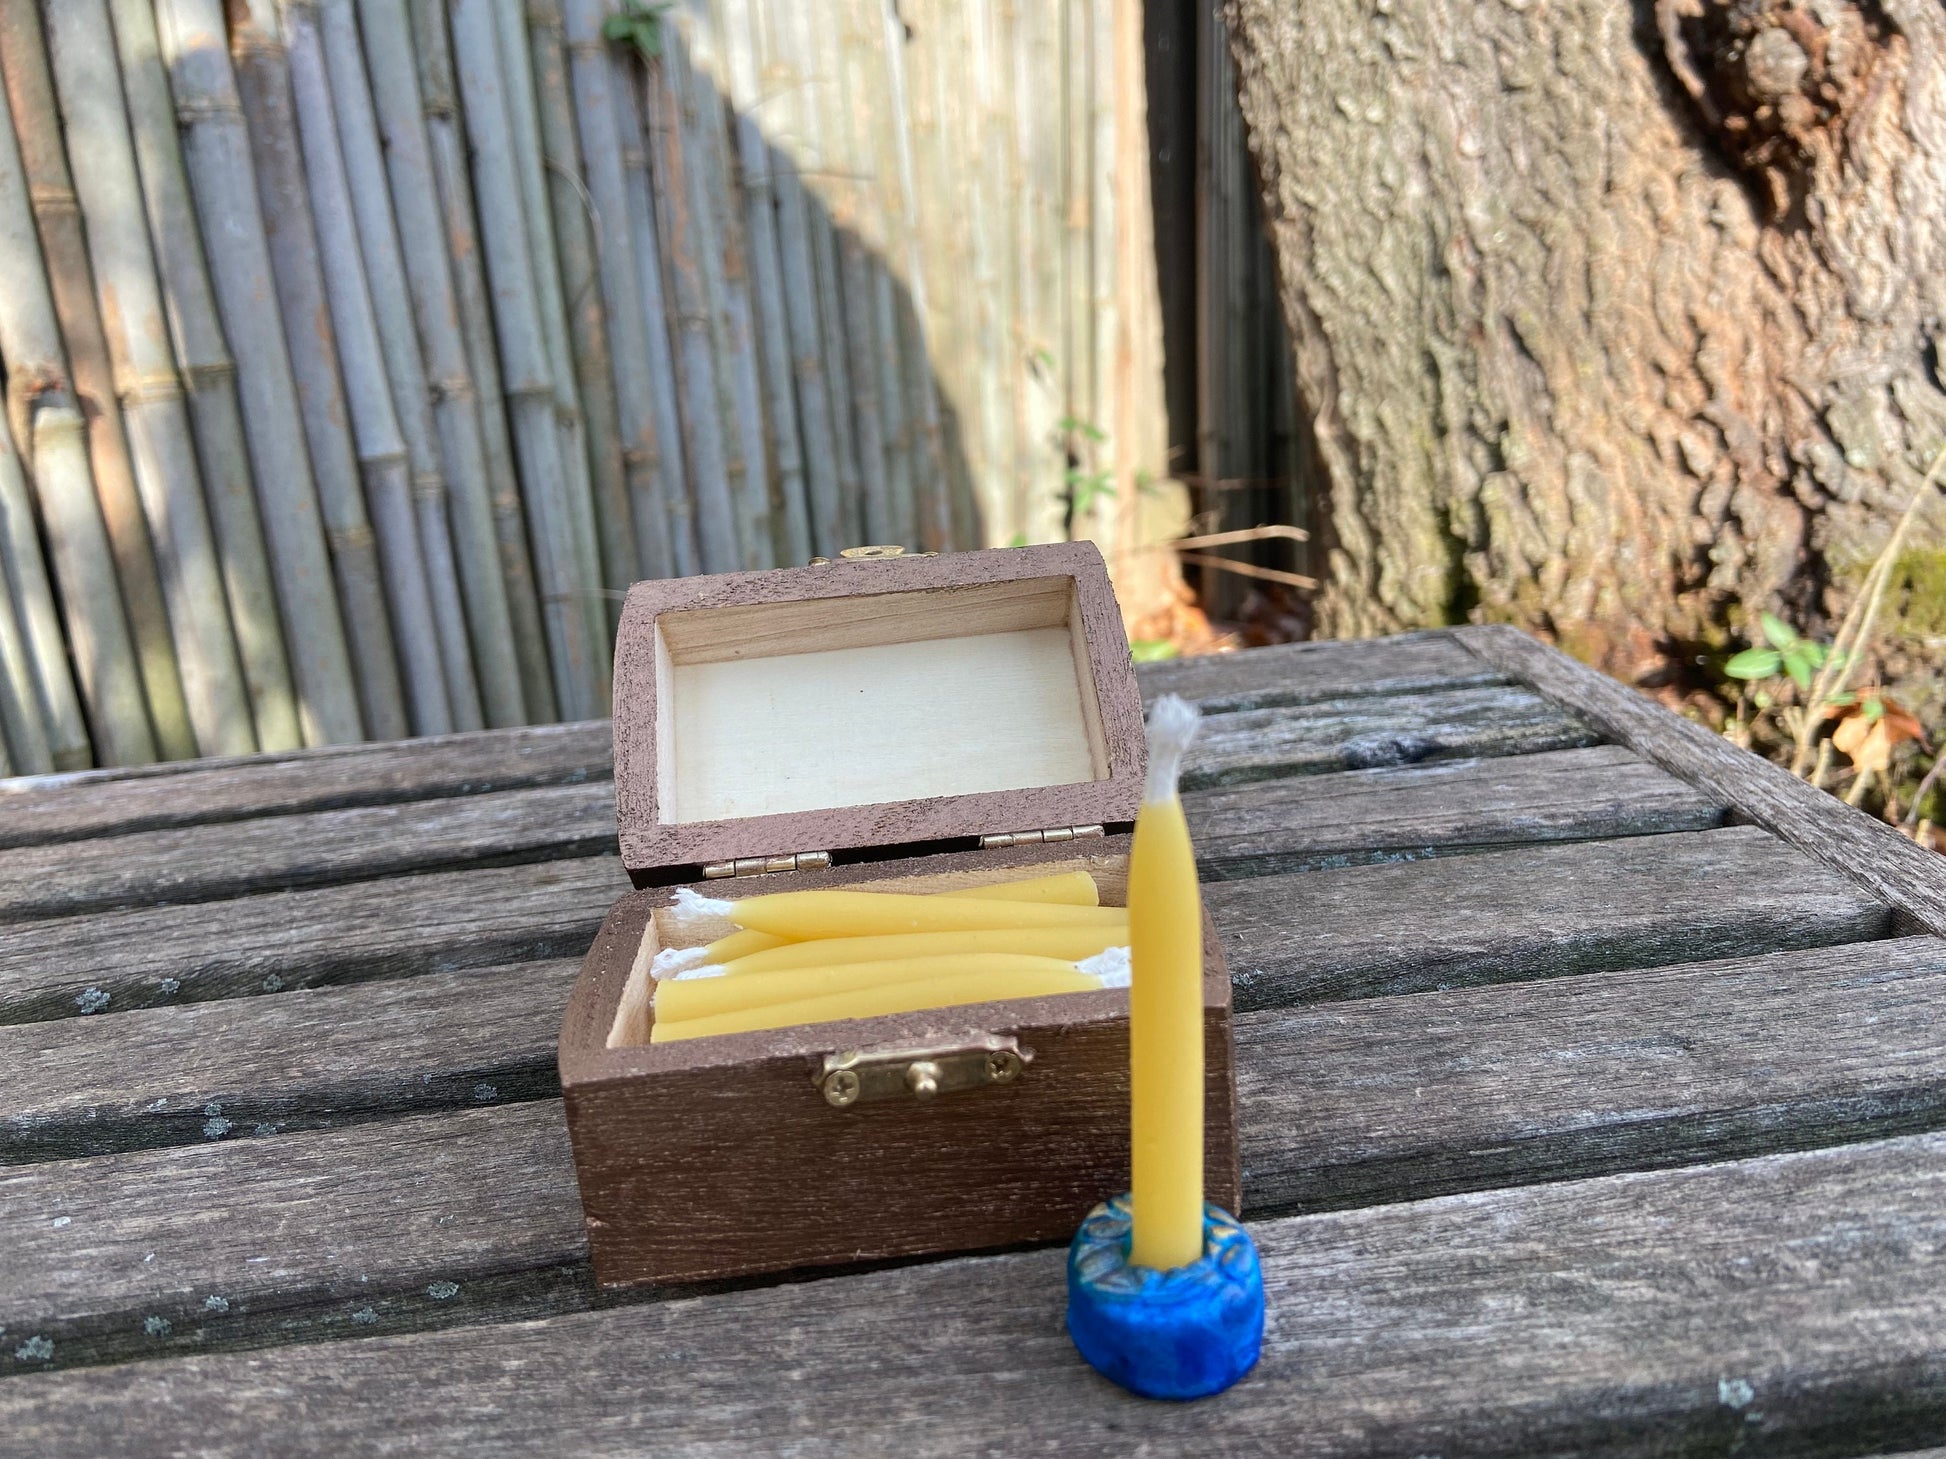 100% Pure Beeswax Candles- 20 Minute Meditation-20 Candle Set-Wooden Box-Owl-Mindful-Ritual-Alter-Intention-Spell-Kit